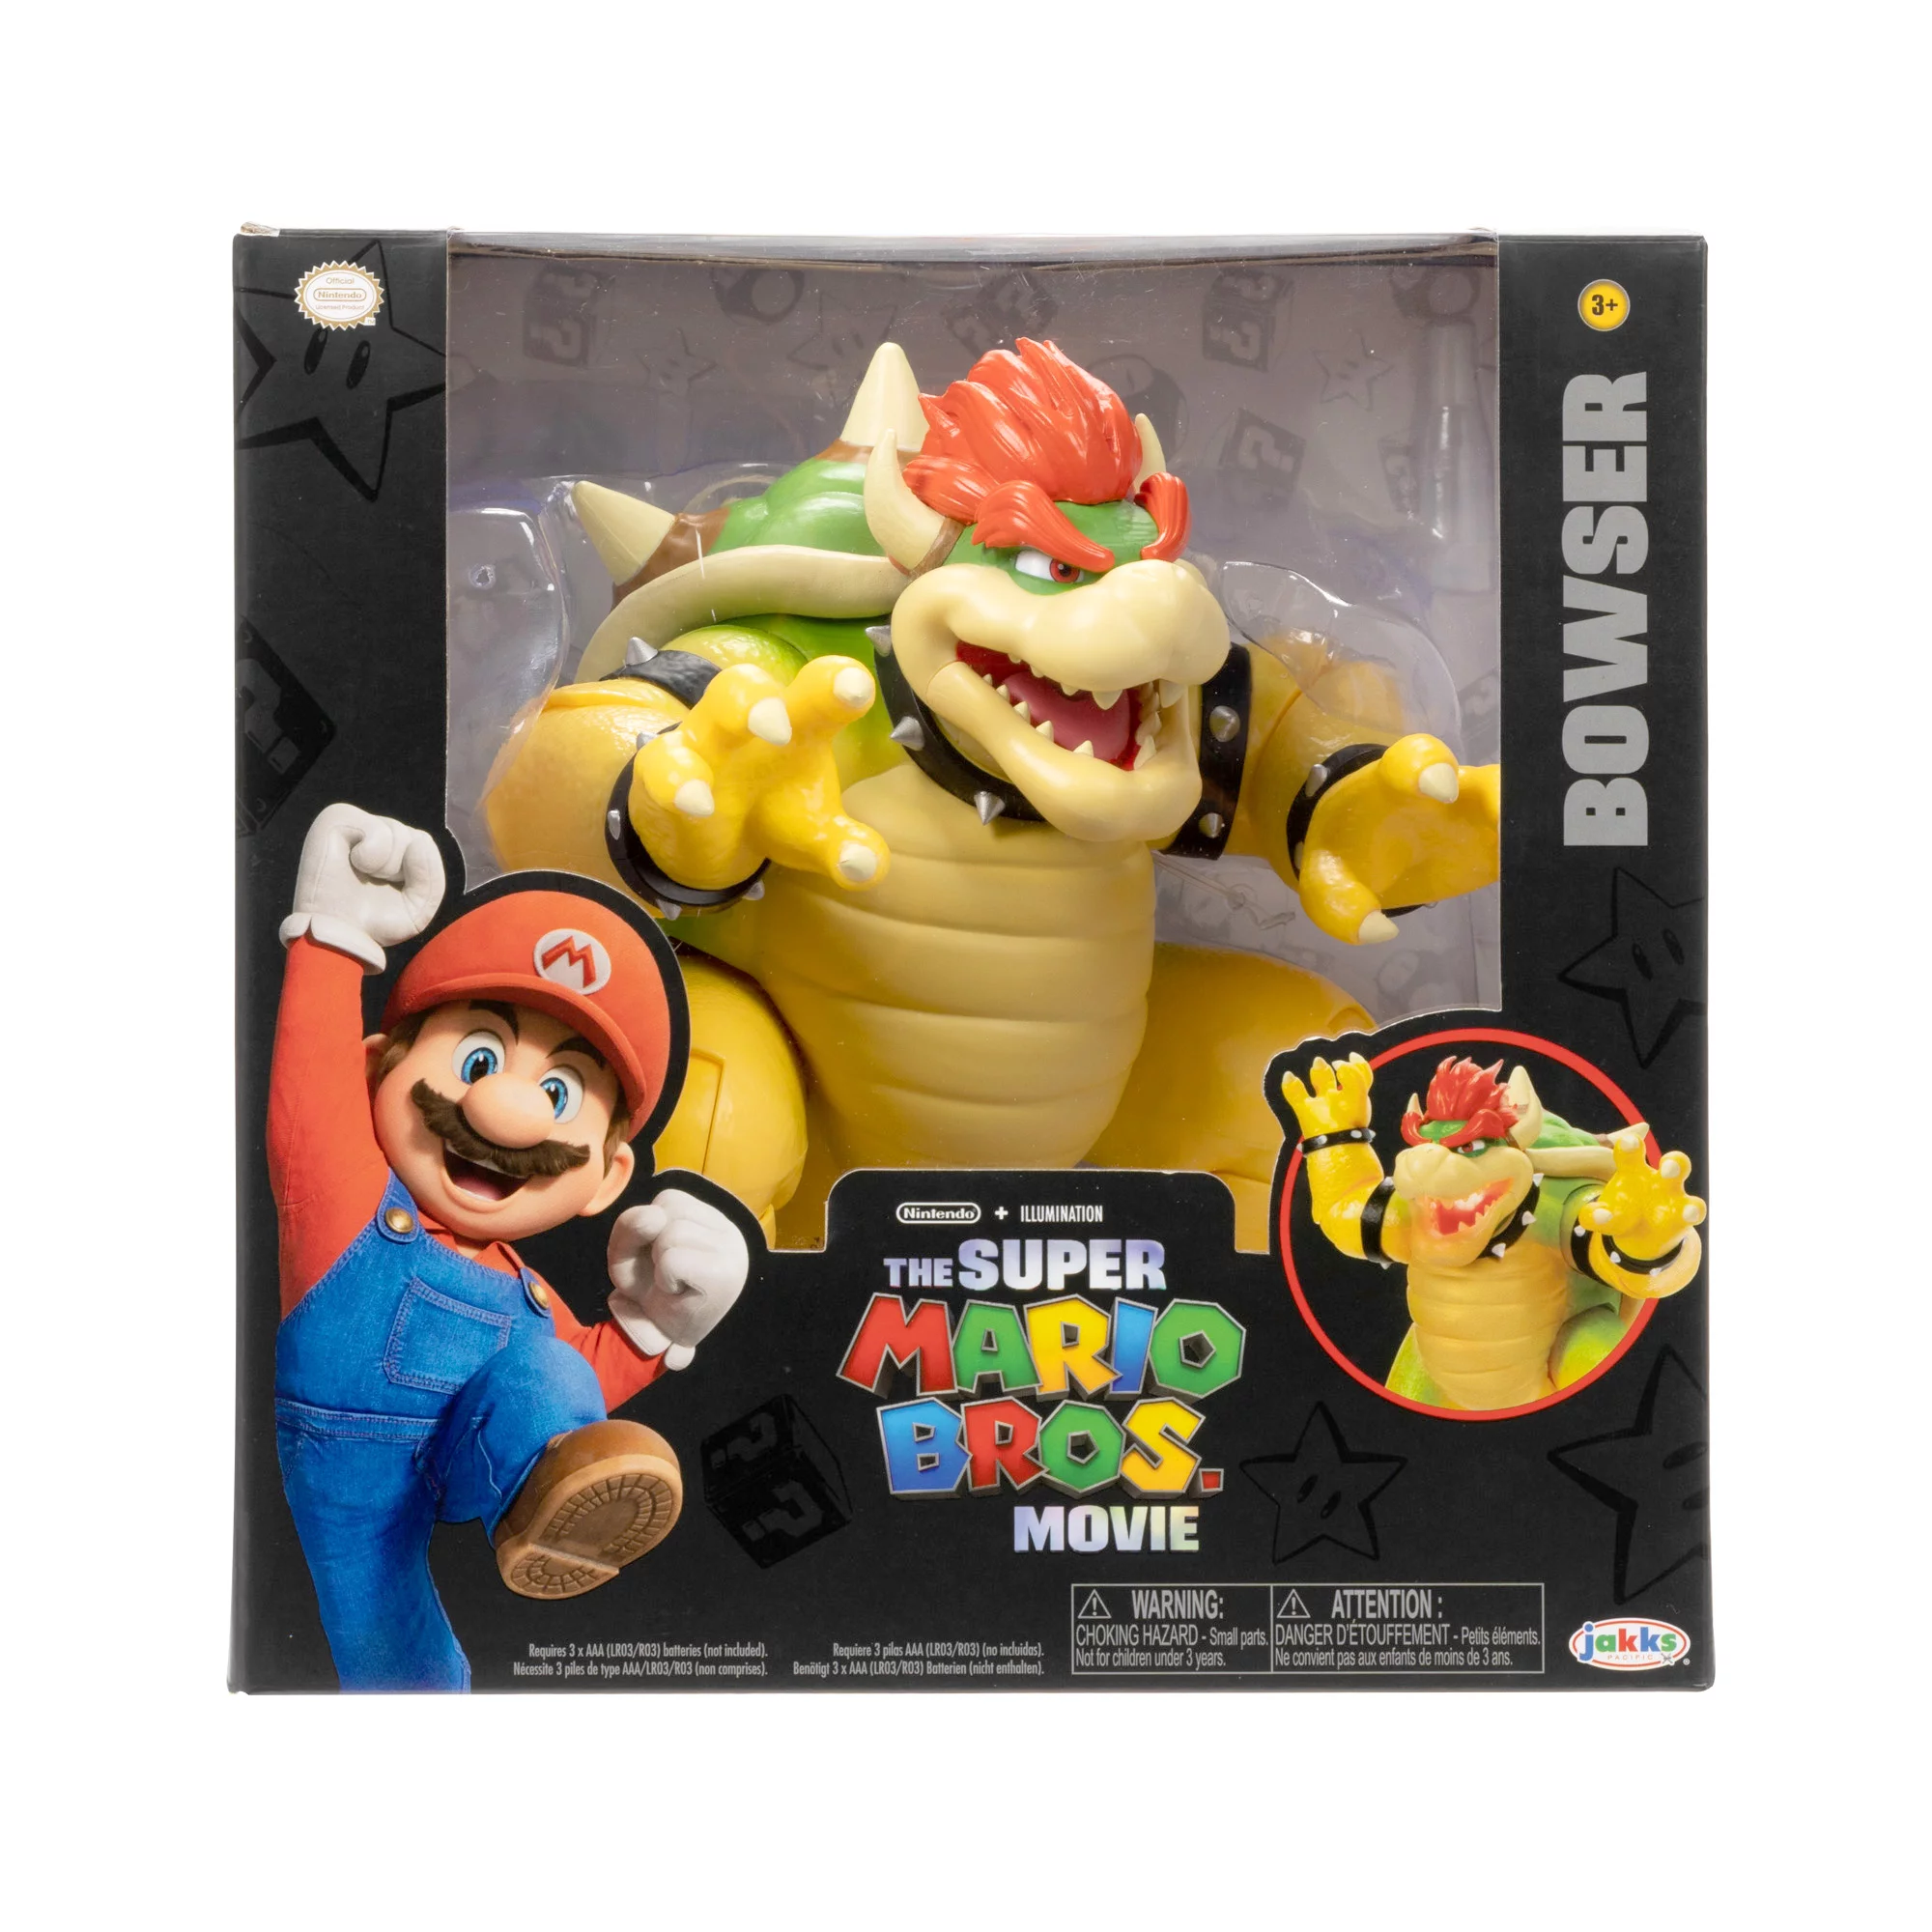 The Super Mario Bros. Movie 7 inch Feature Bowser Action Figure with Fire Breathing Effects